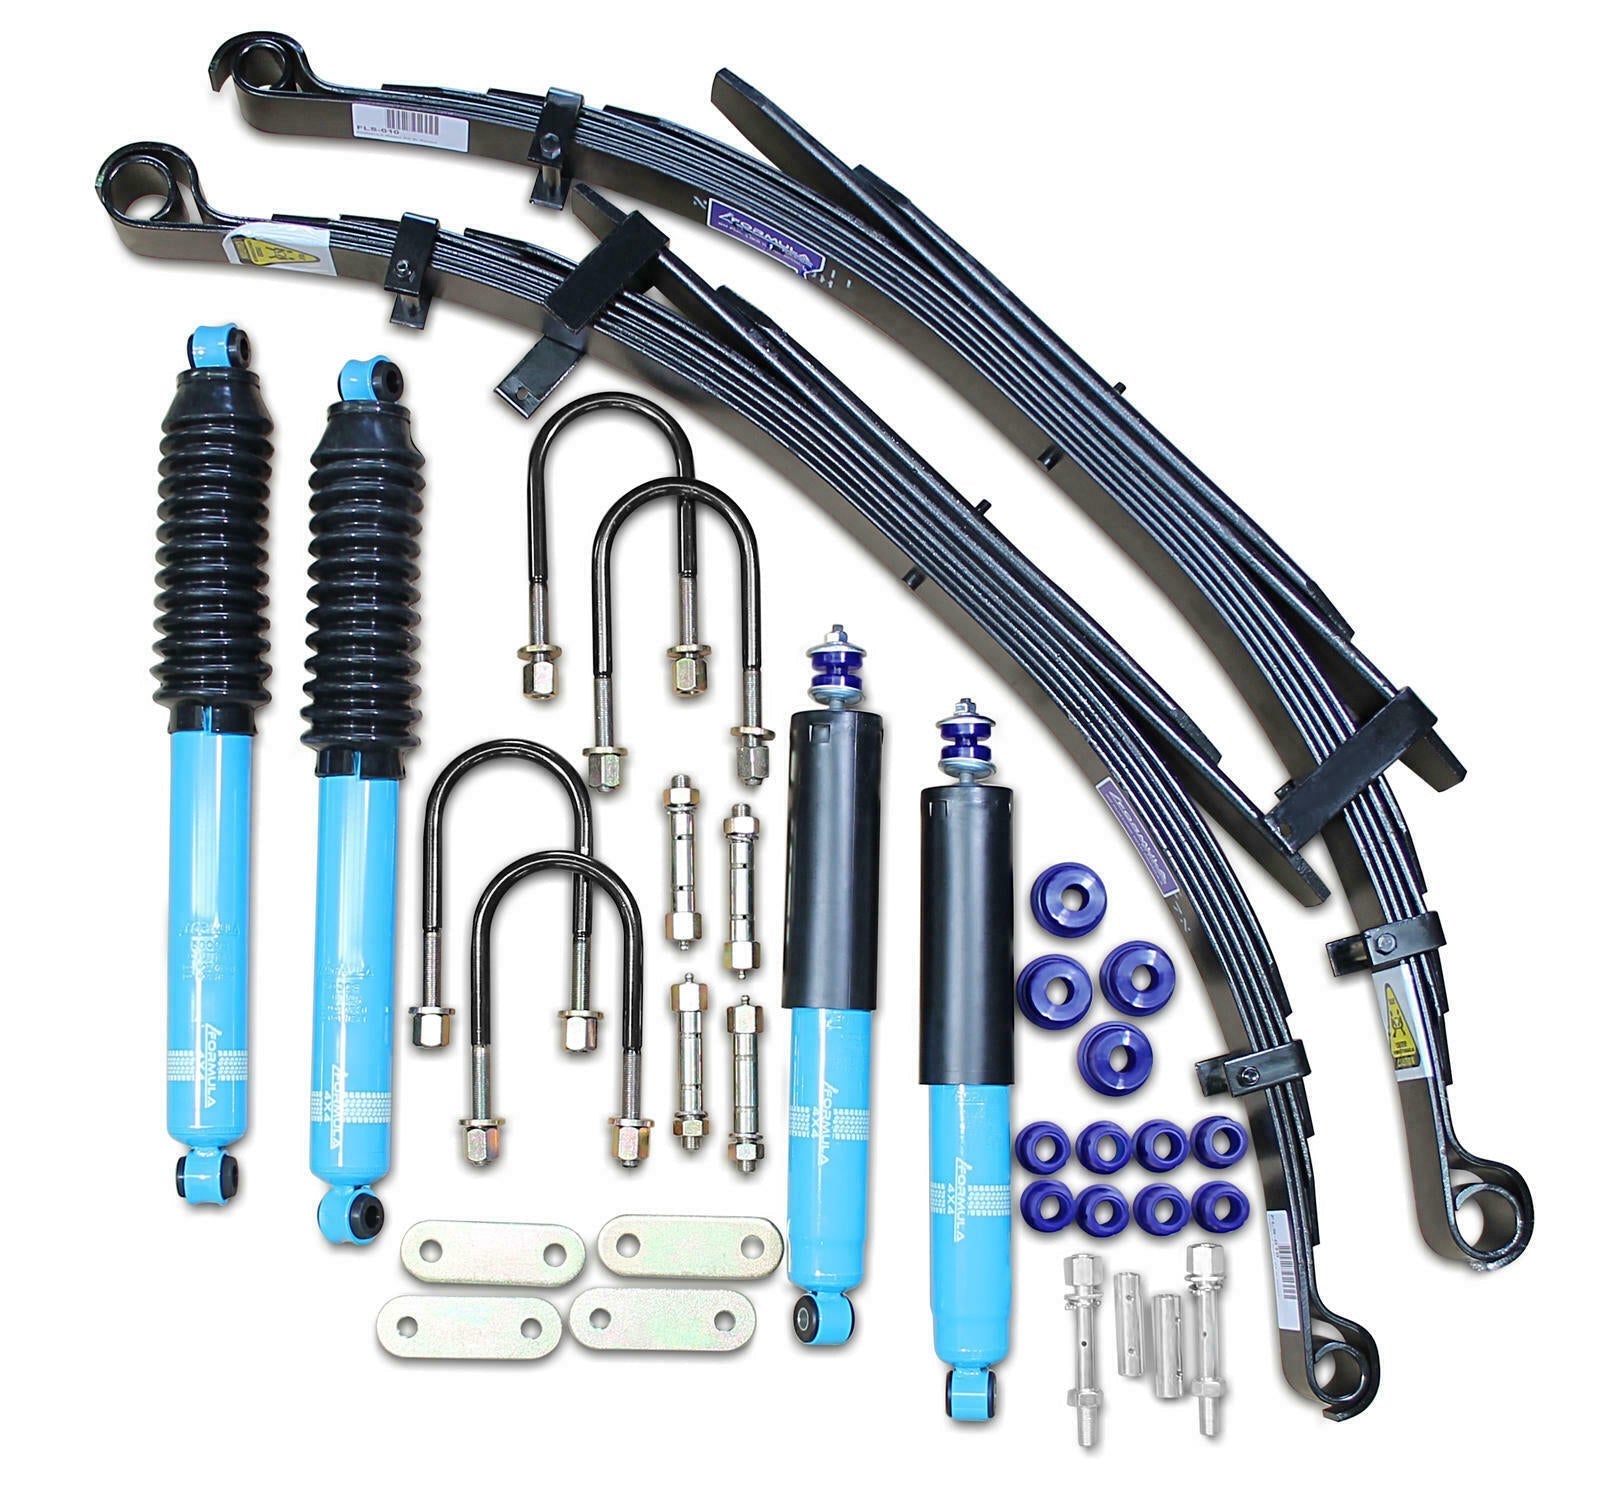 Holden Rodeo TFR TFS 4wd 1988 - 2003 50mm Formula 4wd Suspension Lift Kit